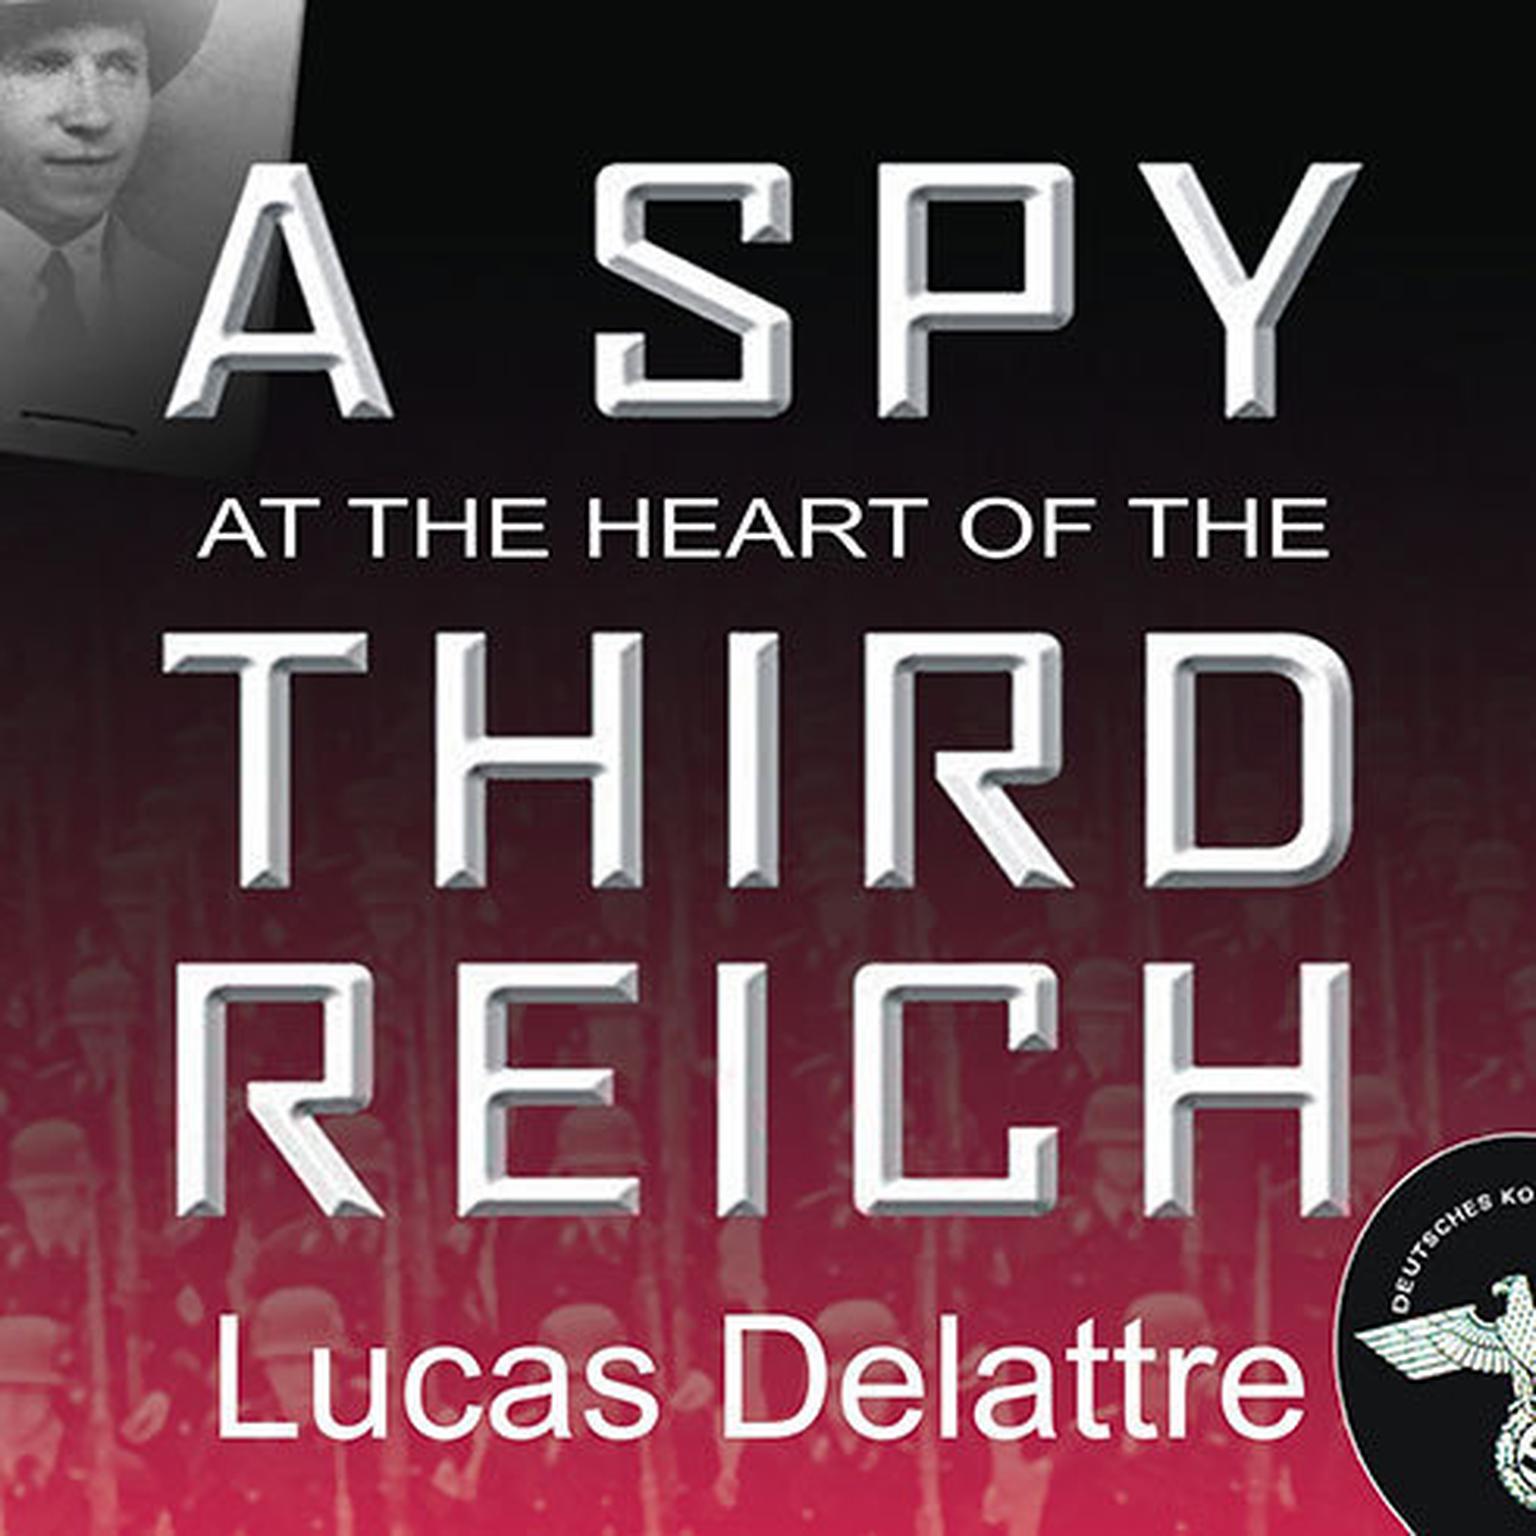 A Spy at the Heart of the Third Reich: The Extraordinary Life of Fritz Kolbe, Americas Most Important Spy in World War II Audiobook, by Lucas Delattre